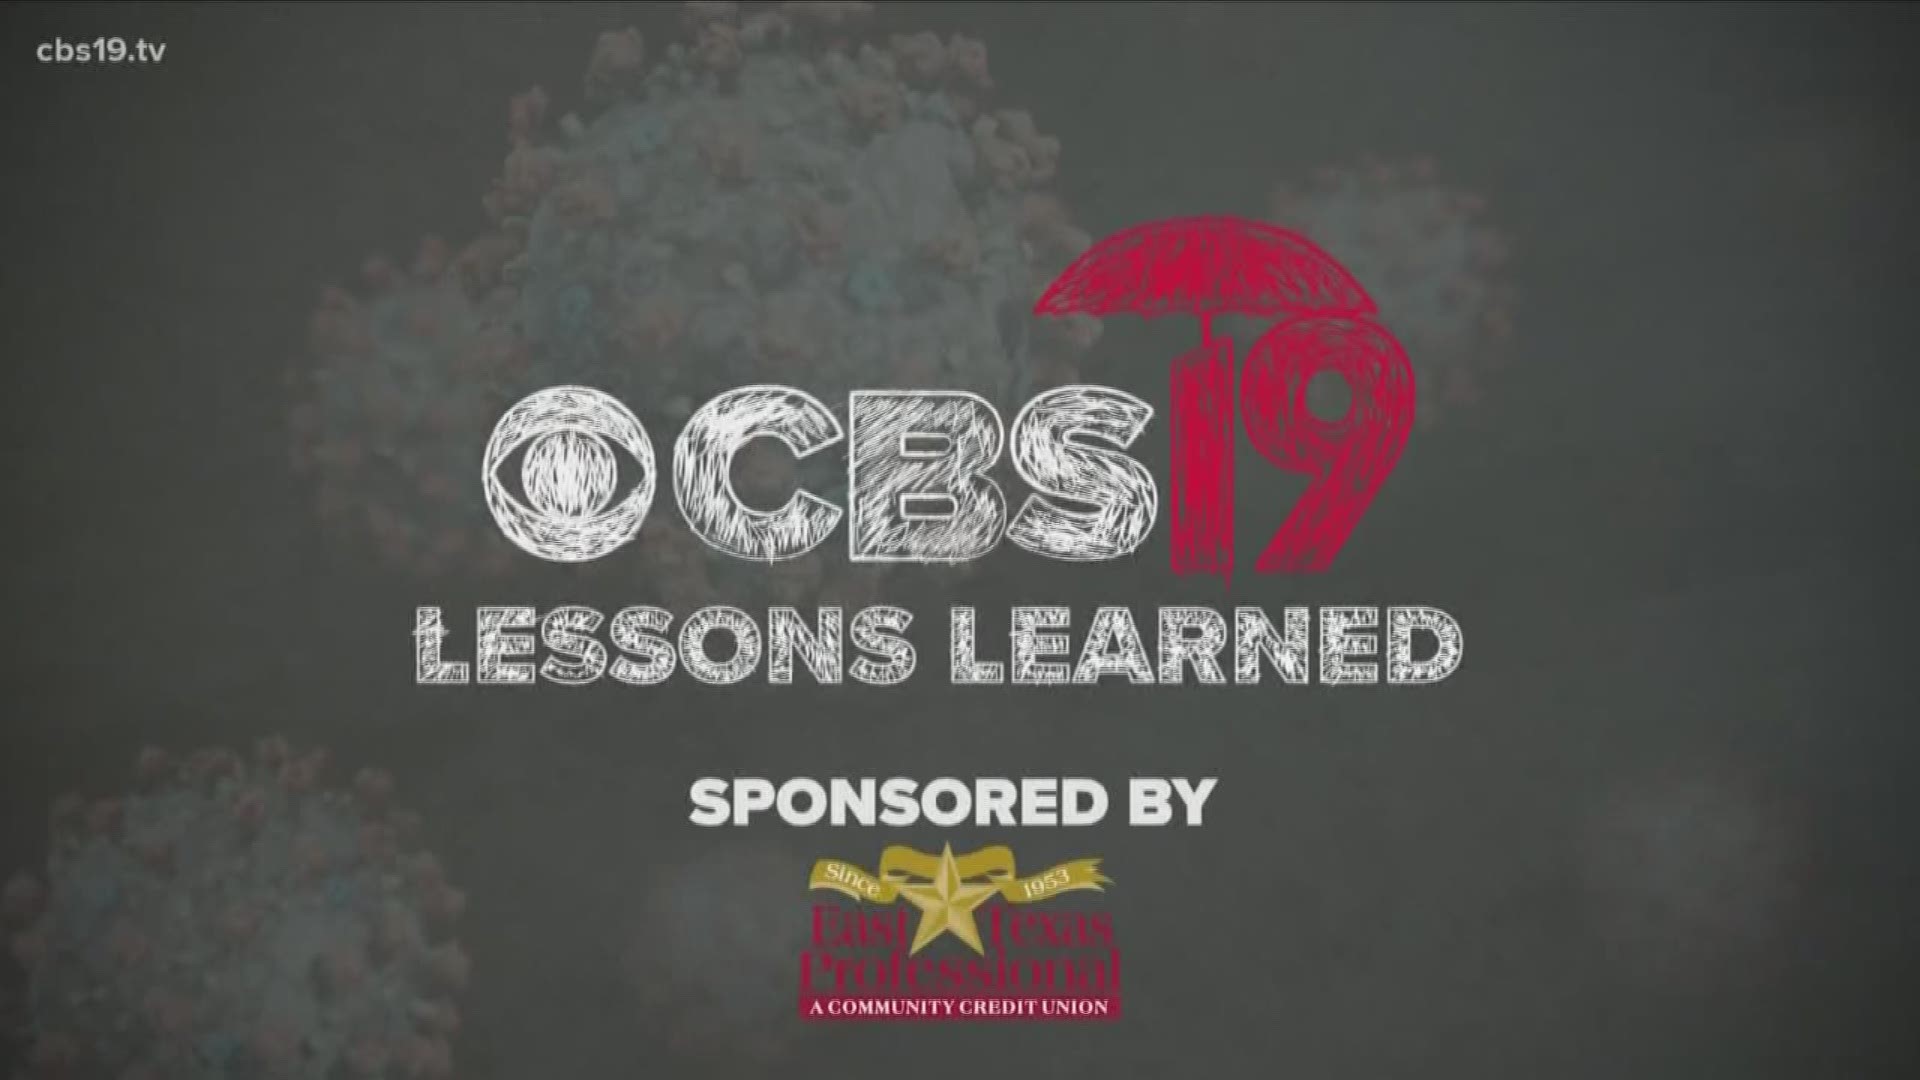 CBS19 will be tackling a different lesson learned from the COVID-19 pandemic and how it affects education every Thursday night at 10 p.m.